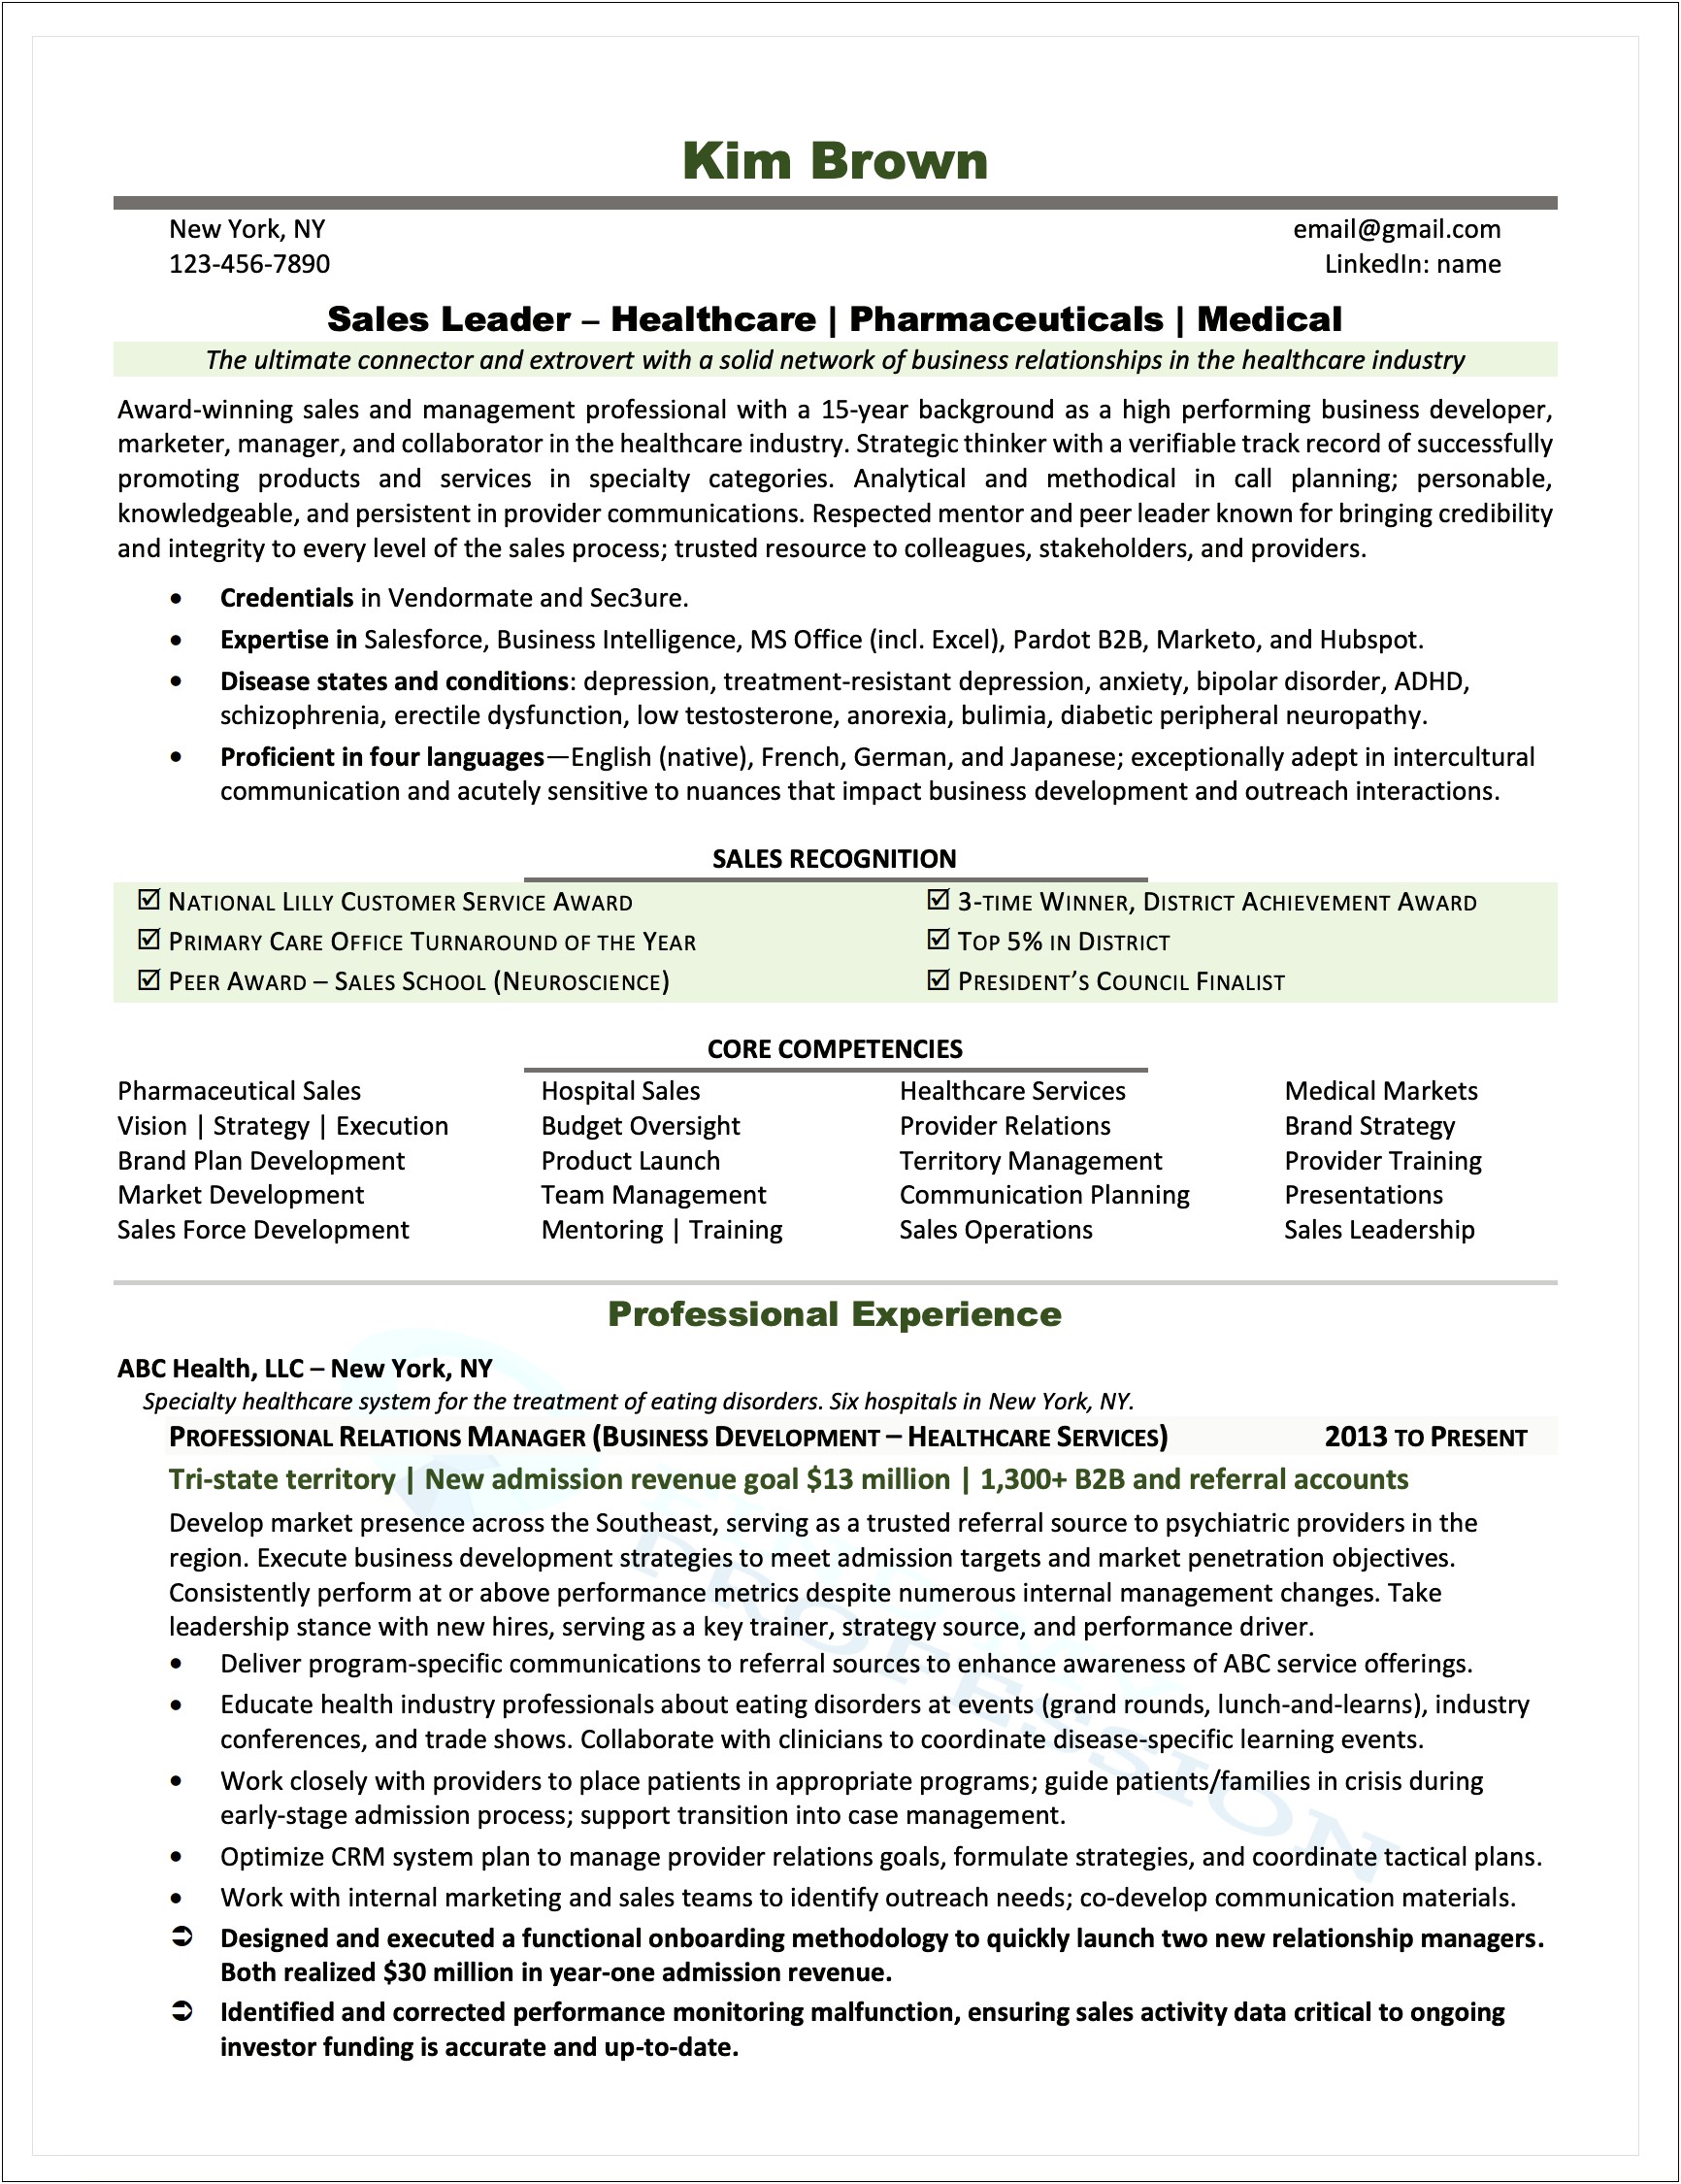 Template For Professional Resume Hospital Vice President